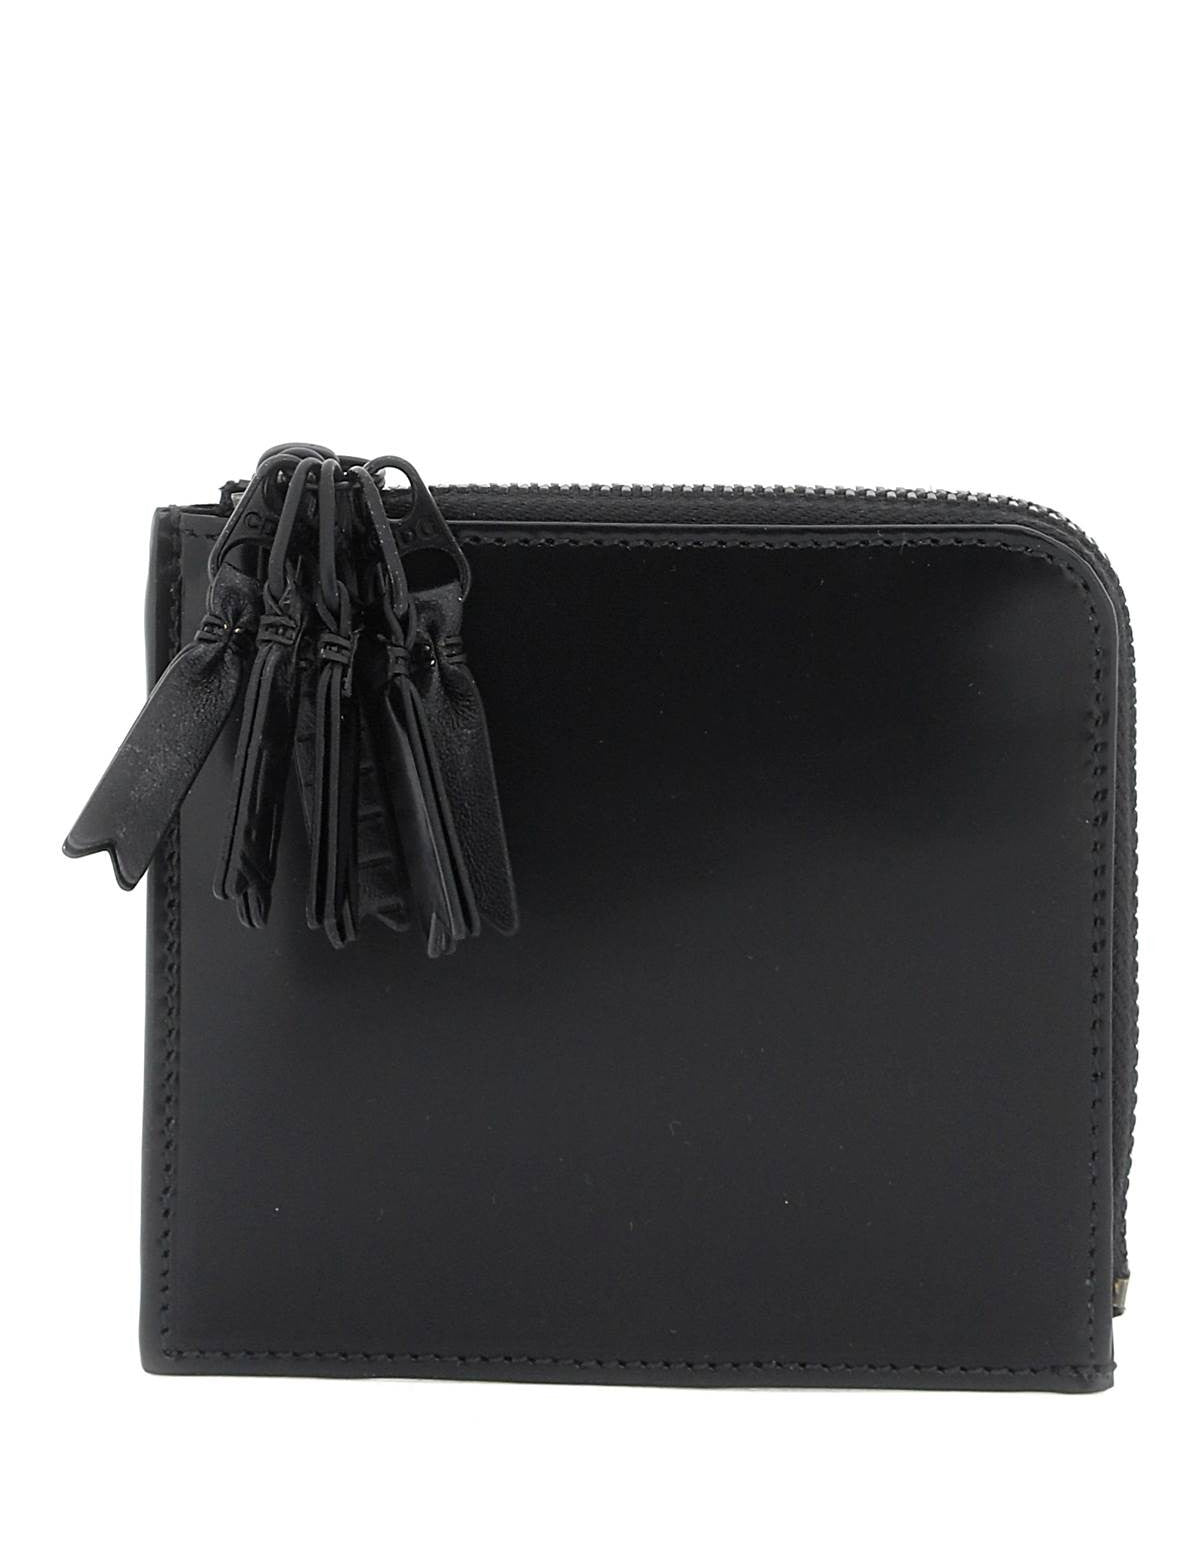 comme-des-garcons-wallet-leather-multi-zip-wallet-with.jpg